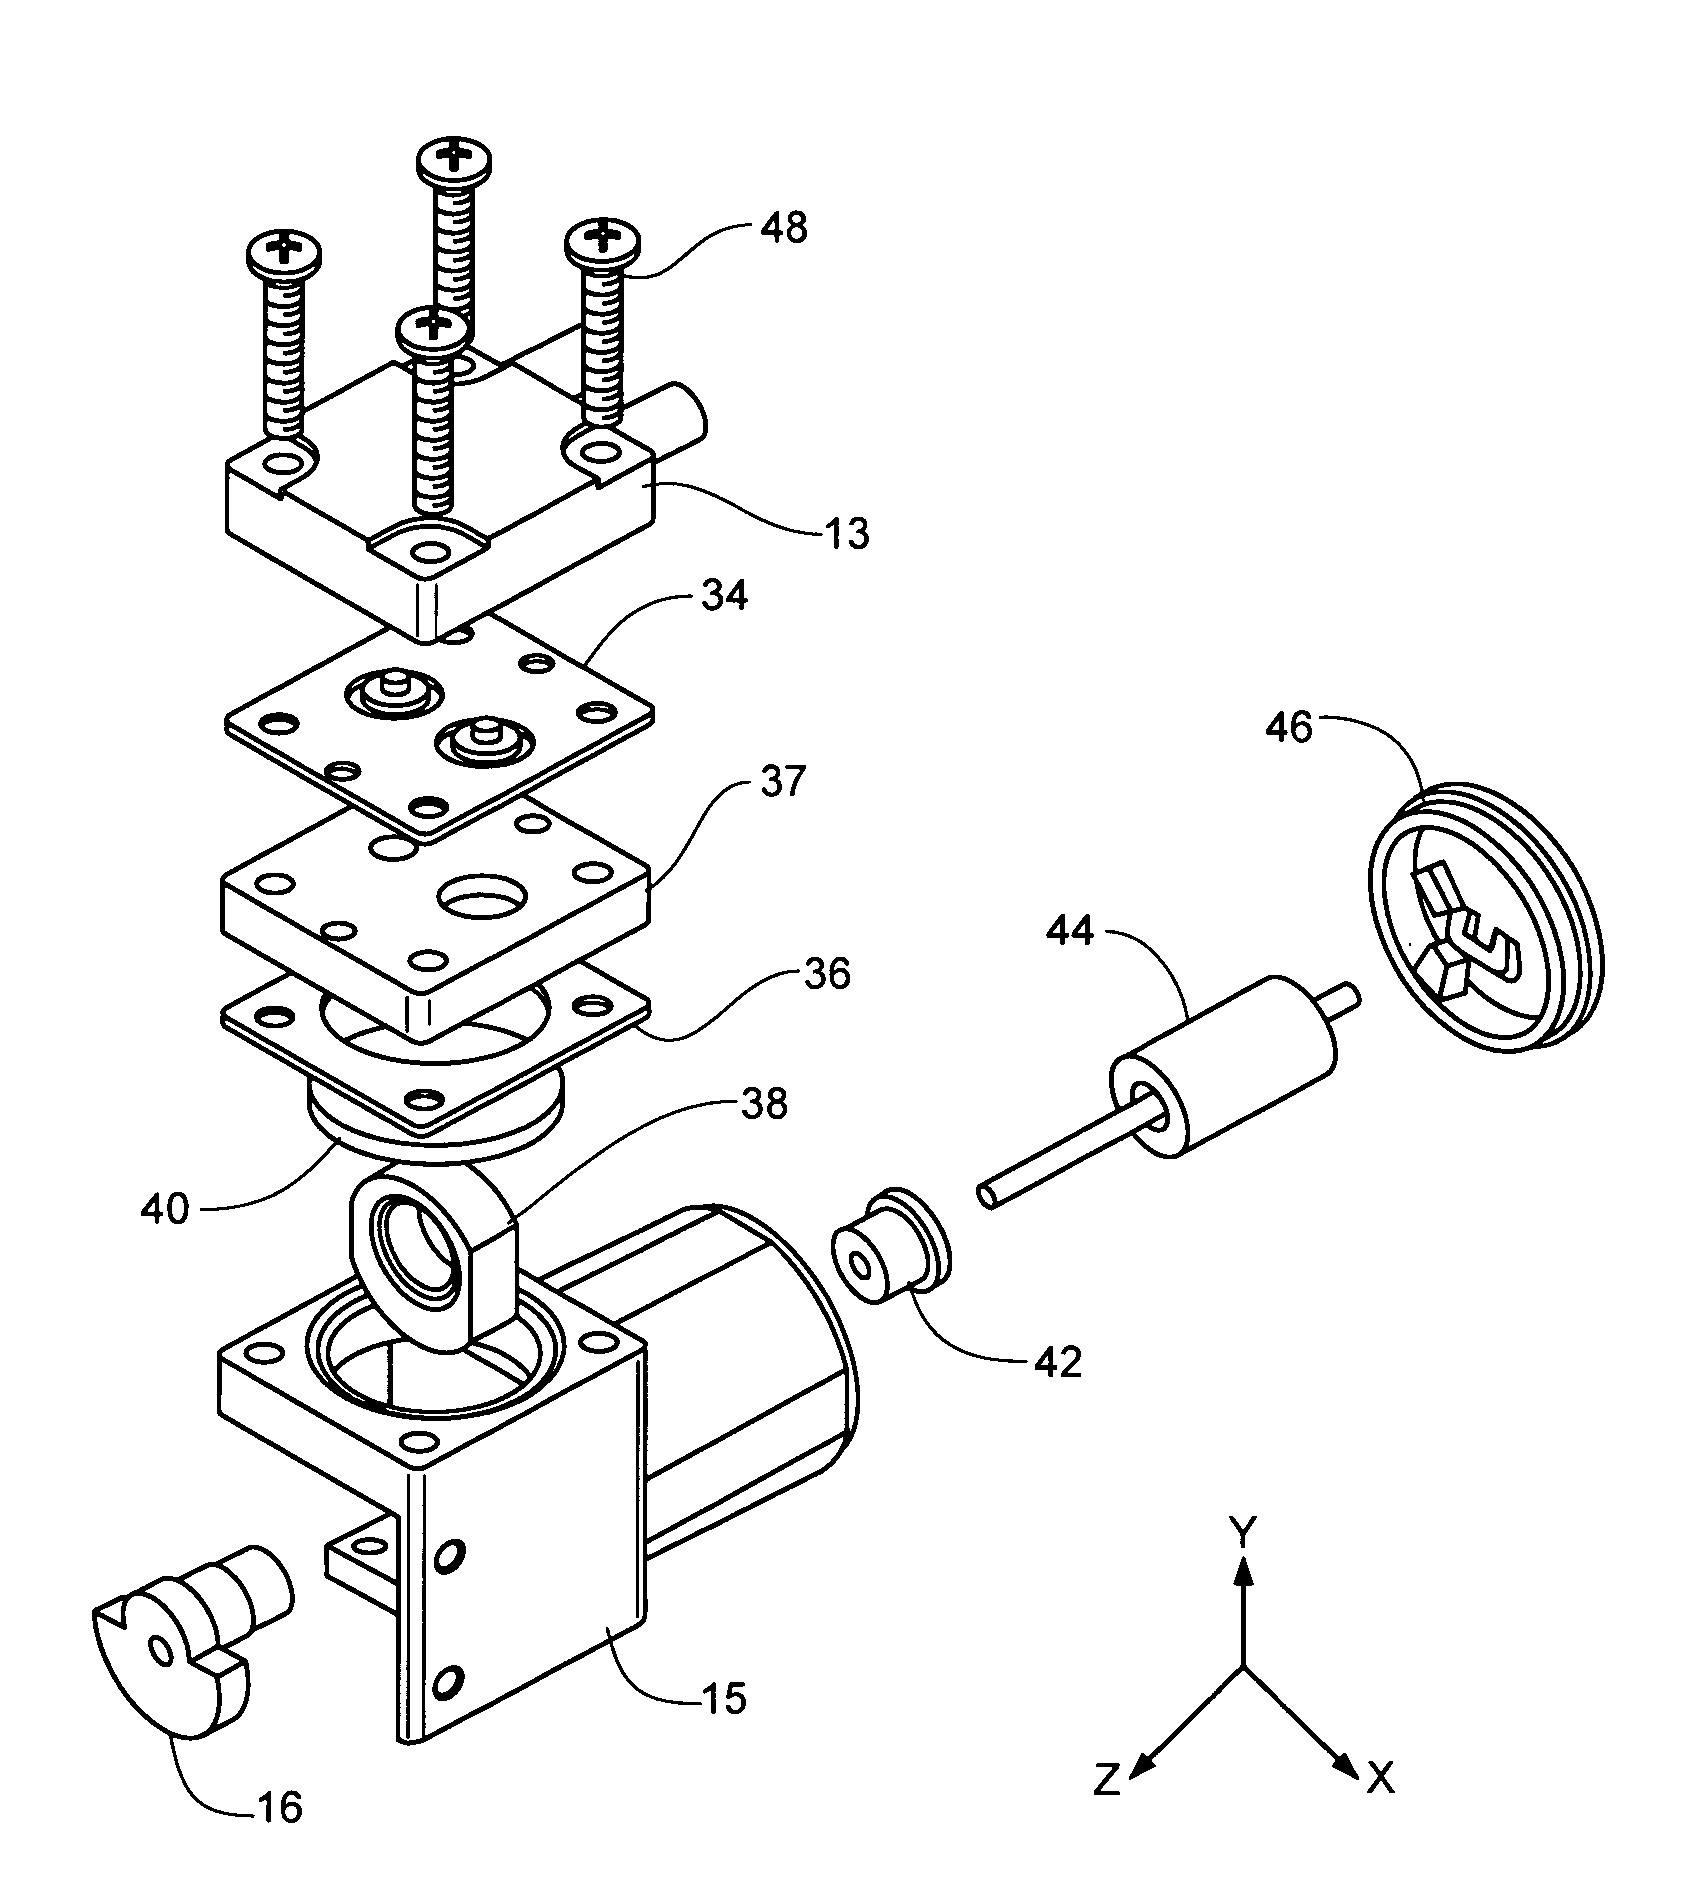 Integrated pump and motor